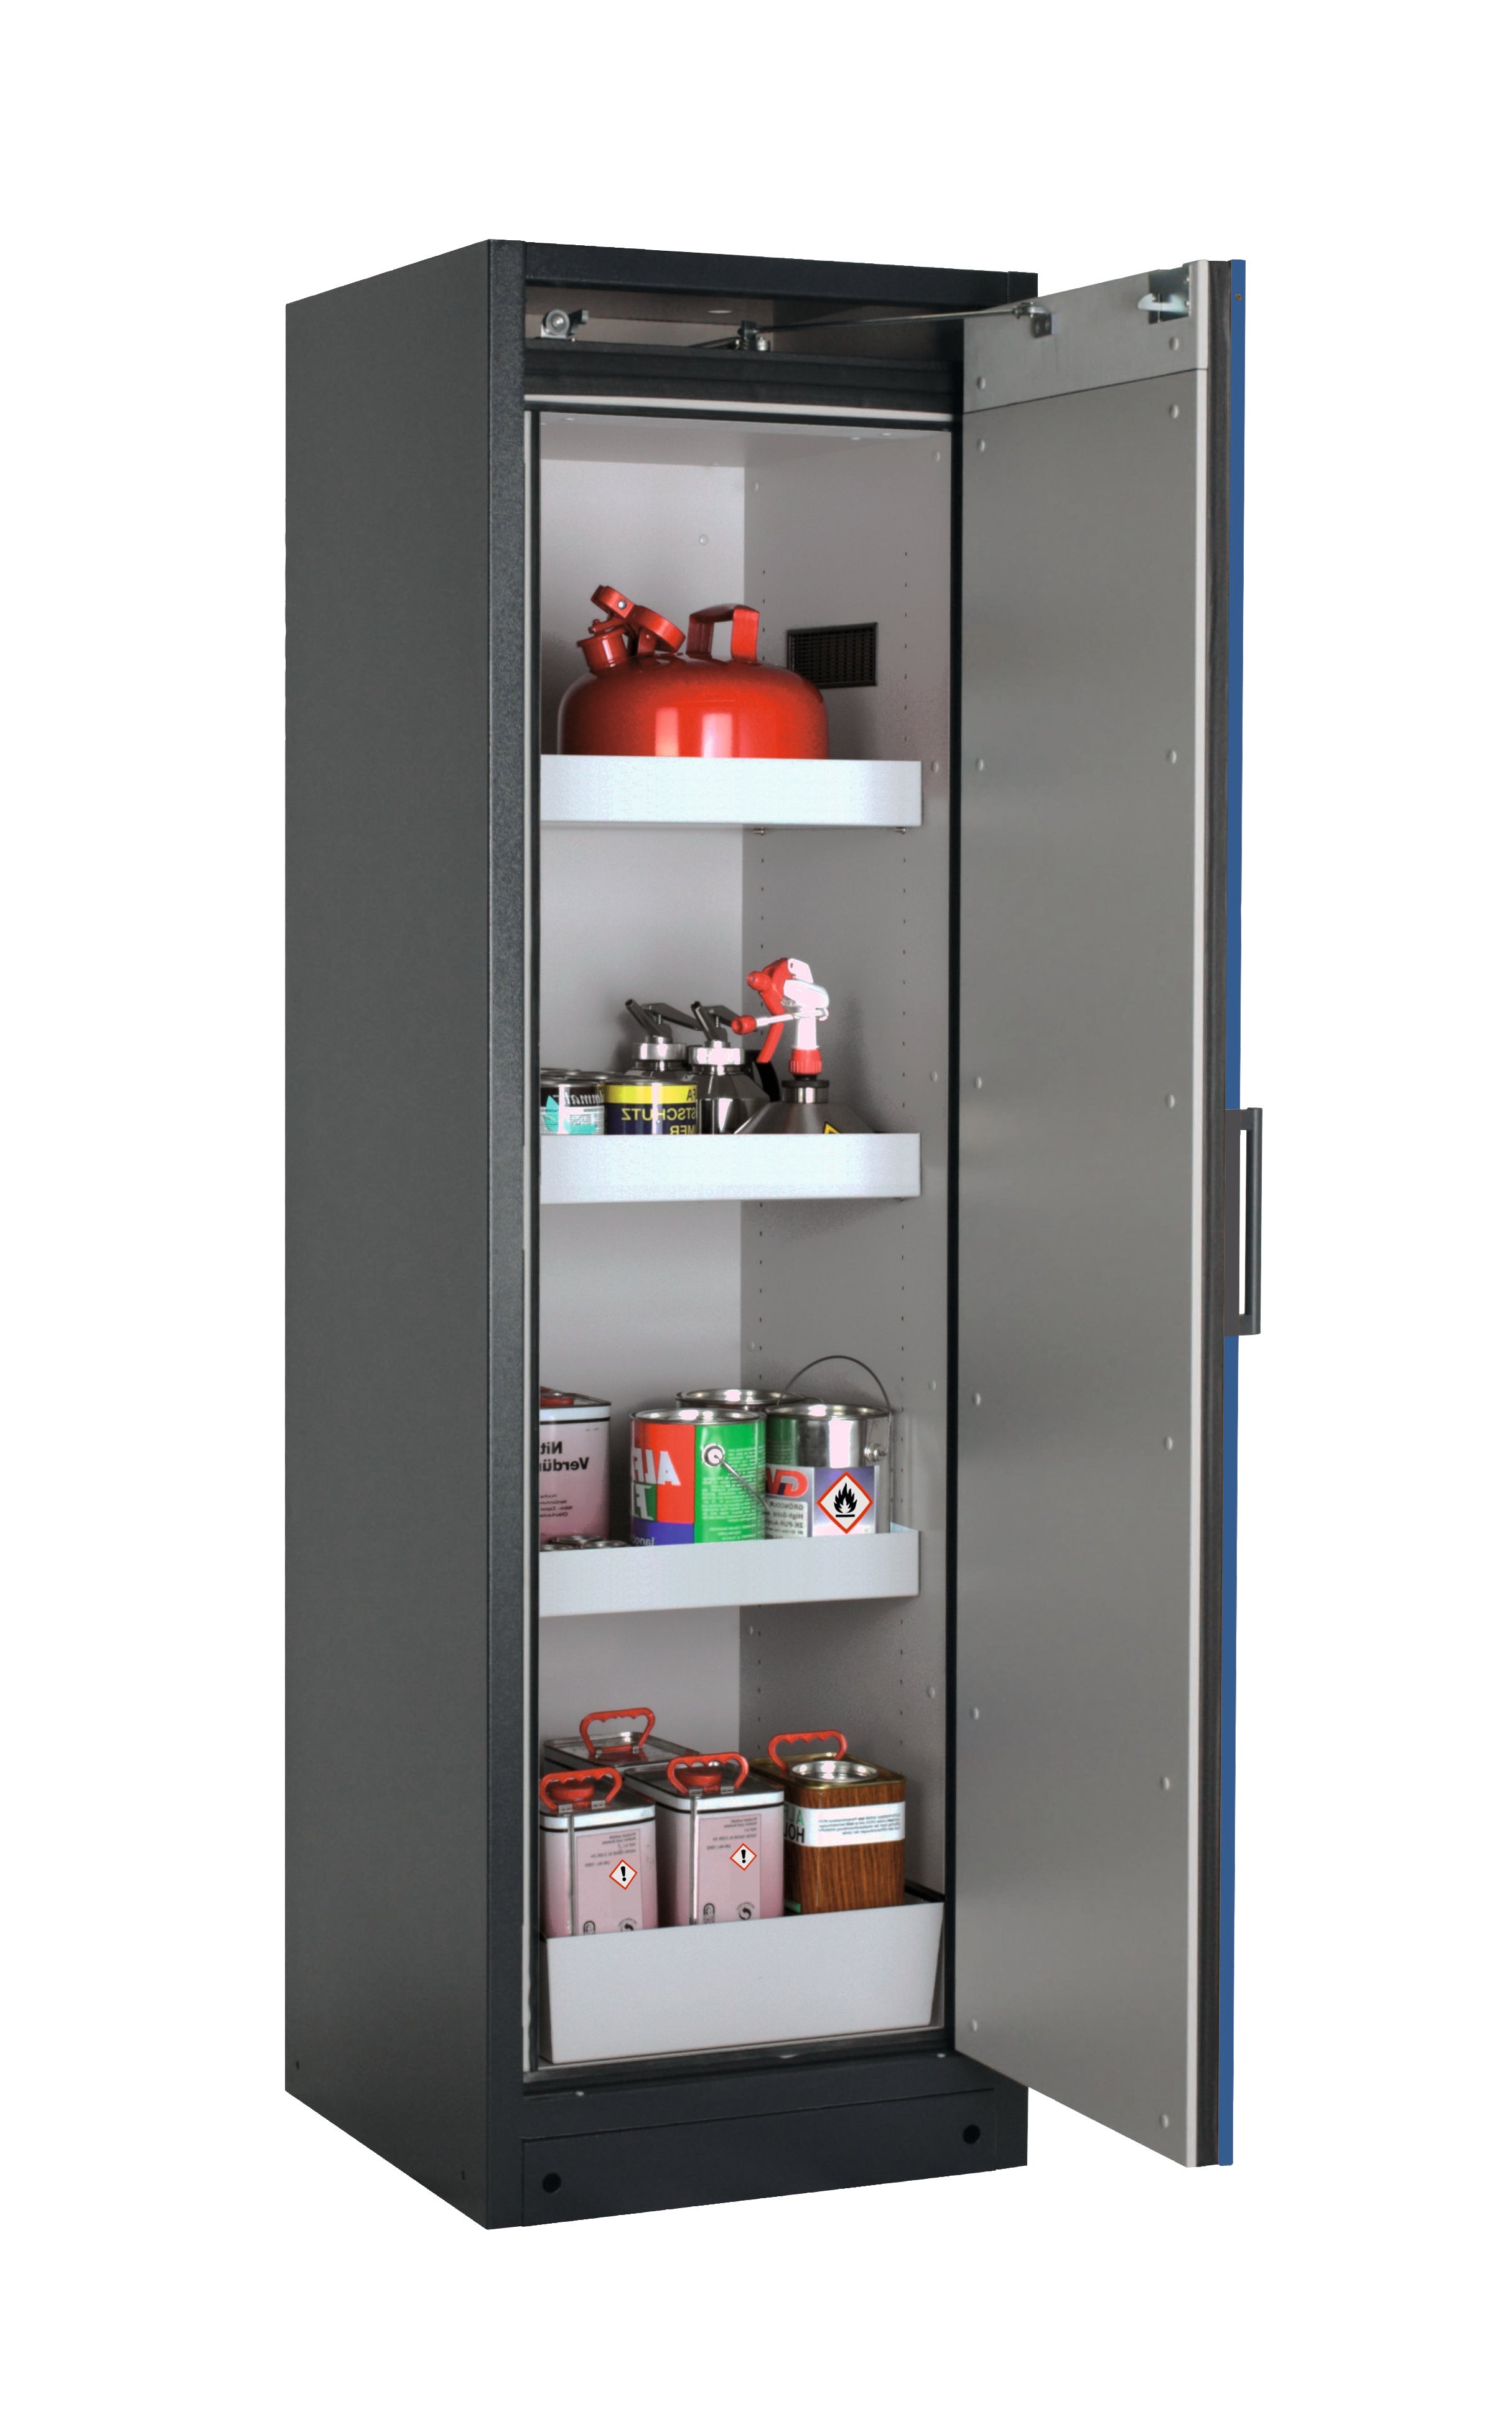 Type 90 safety storage cabinet Q-CLASSIC-90 model Q90.195.060.R in gentian blue RAL 5010 with 3x tray shelf (standard) (sheet steel),